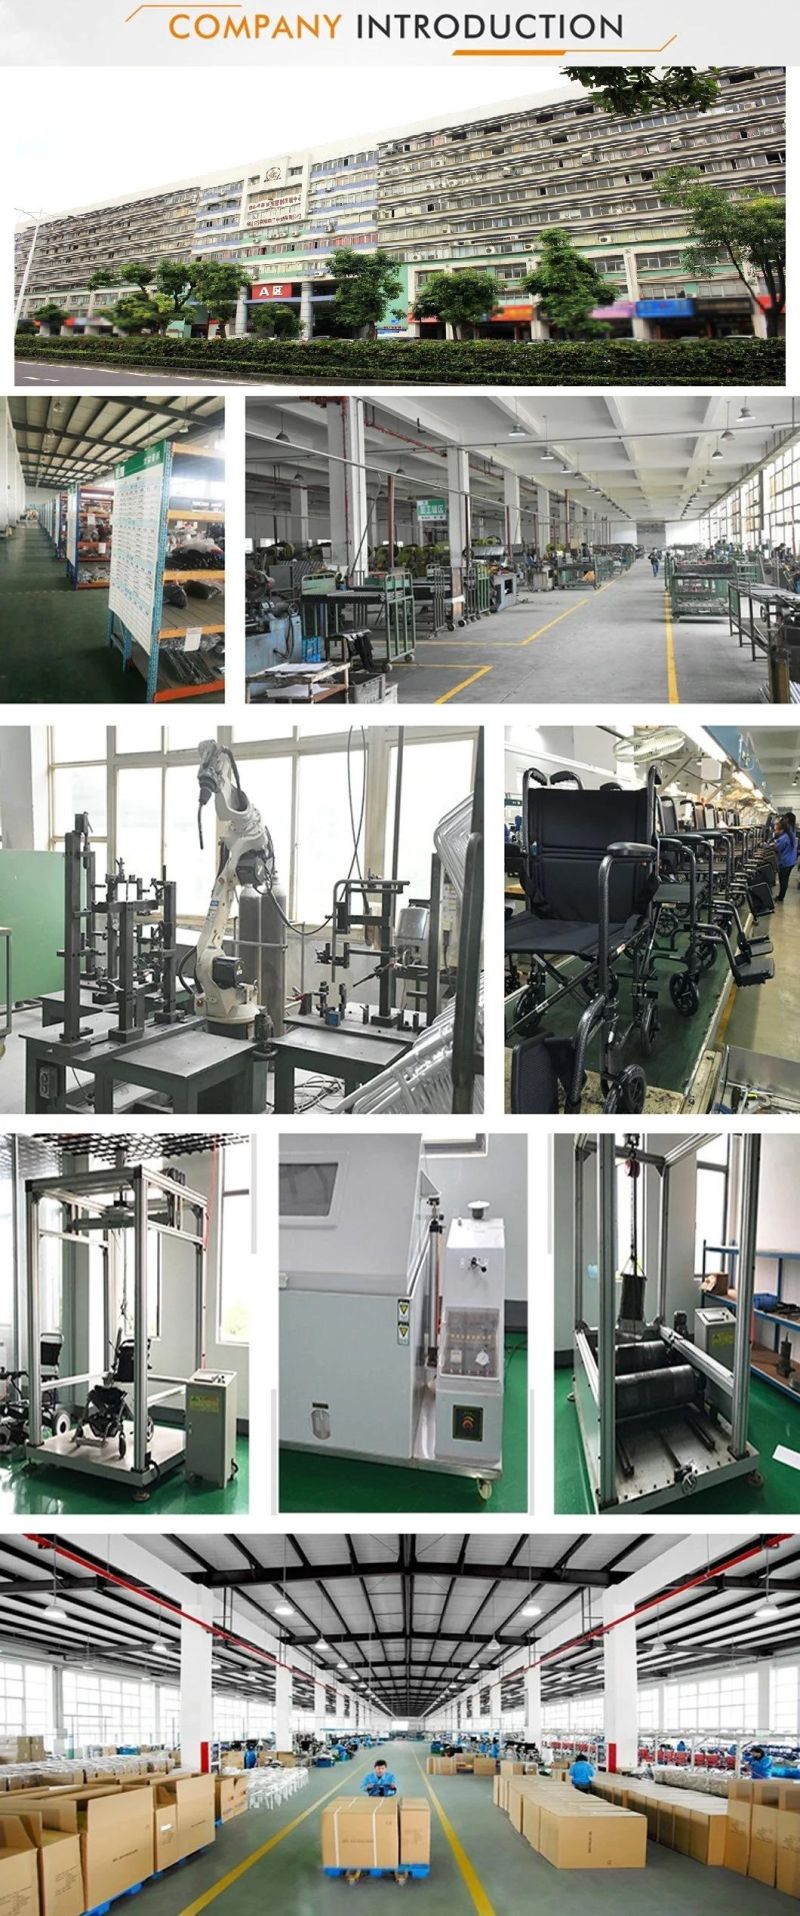 Medical Equipment Apparatus Steel Aluminum Alloy Folding Electric OEM Customized Manual Disabled Light Elderly Accessibilitymotion Factory or Wheelchair